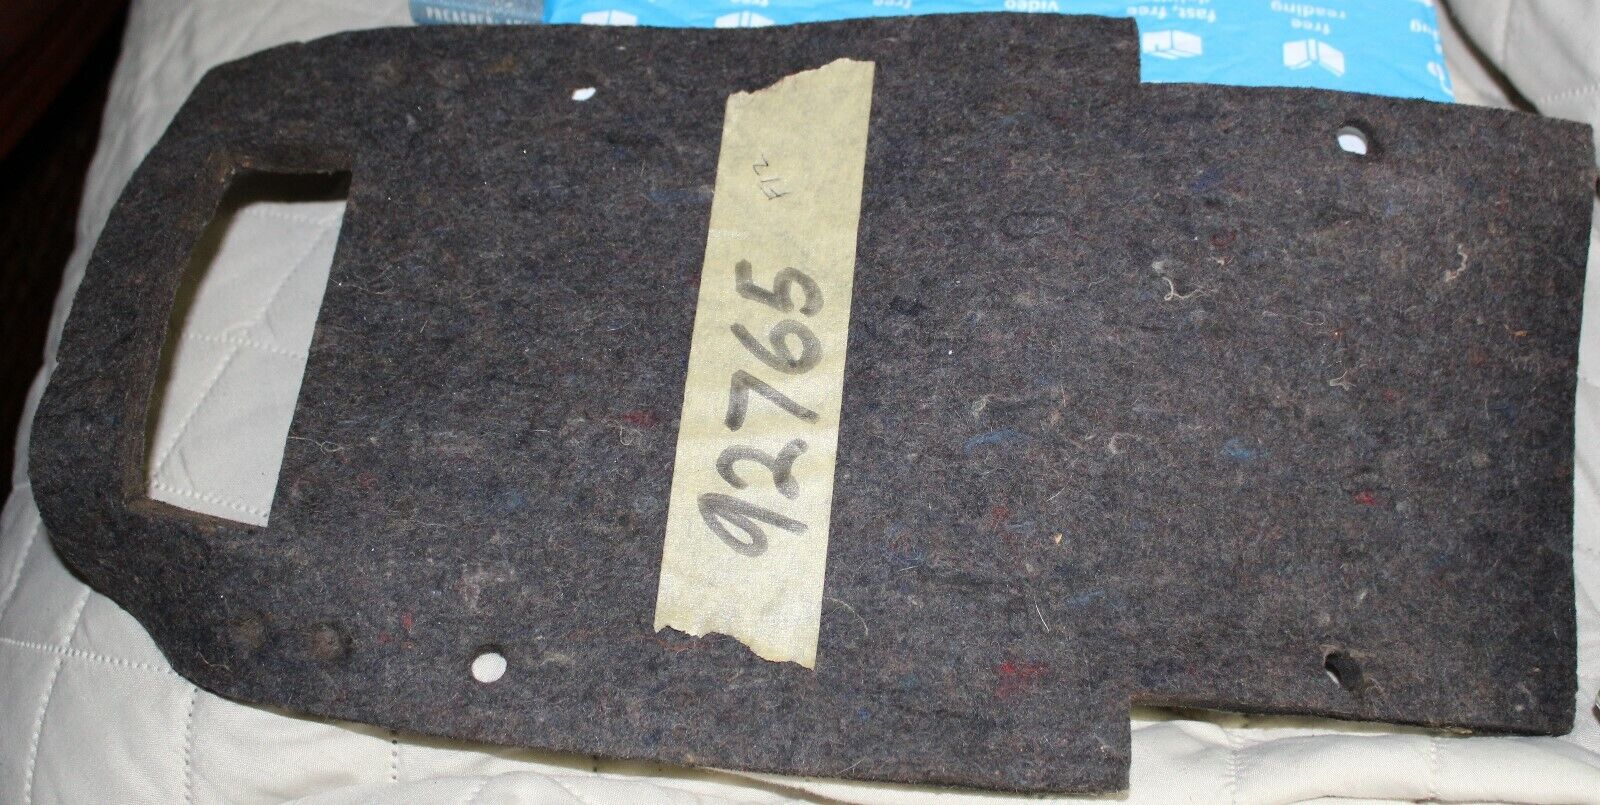 Teletype Limited Special Price Felt Pad For Mail order cheap Model 14 No. TD - 92765 Part